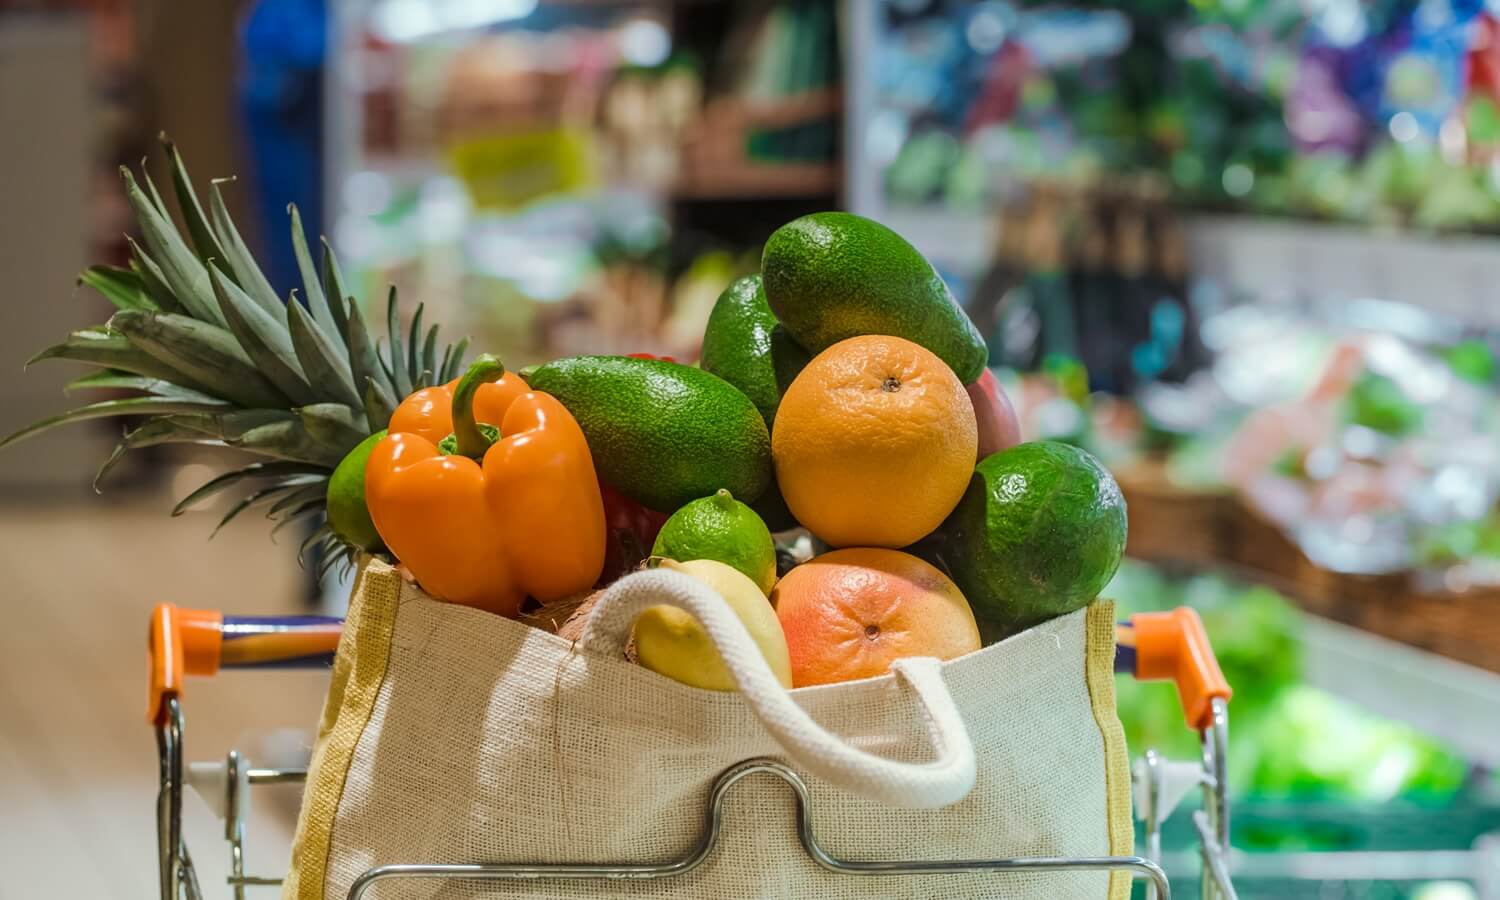 eco-friendly grocery bag for zero waste and greener choice for the environment